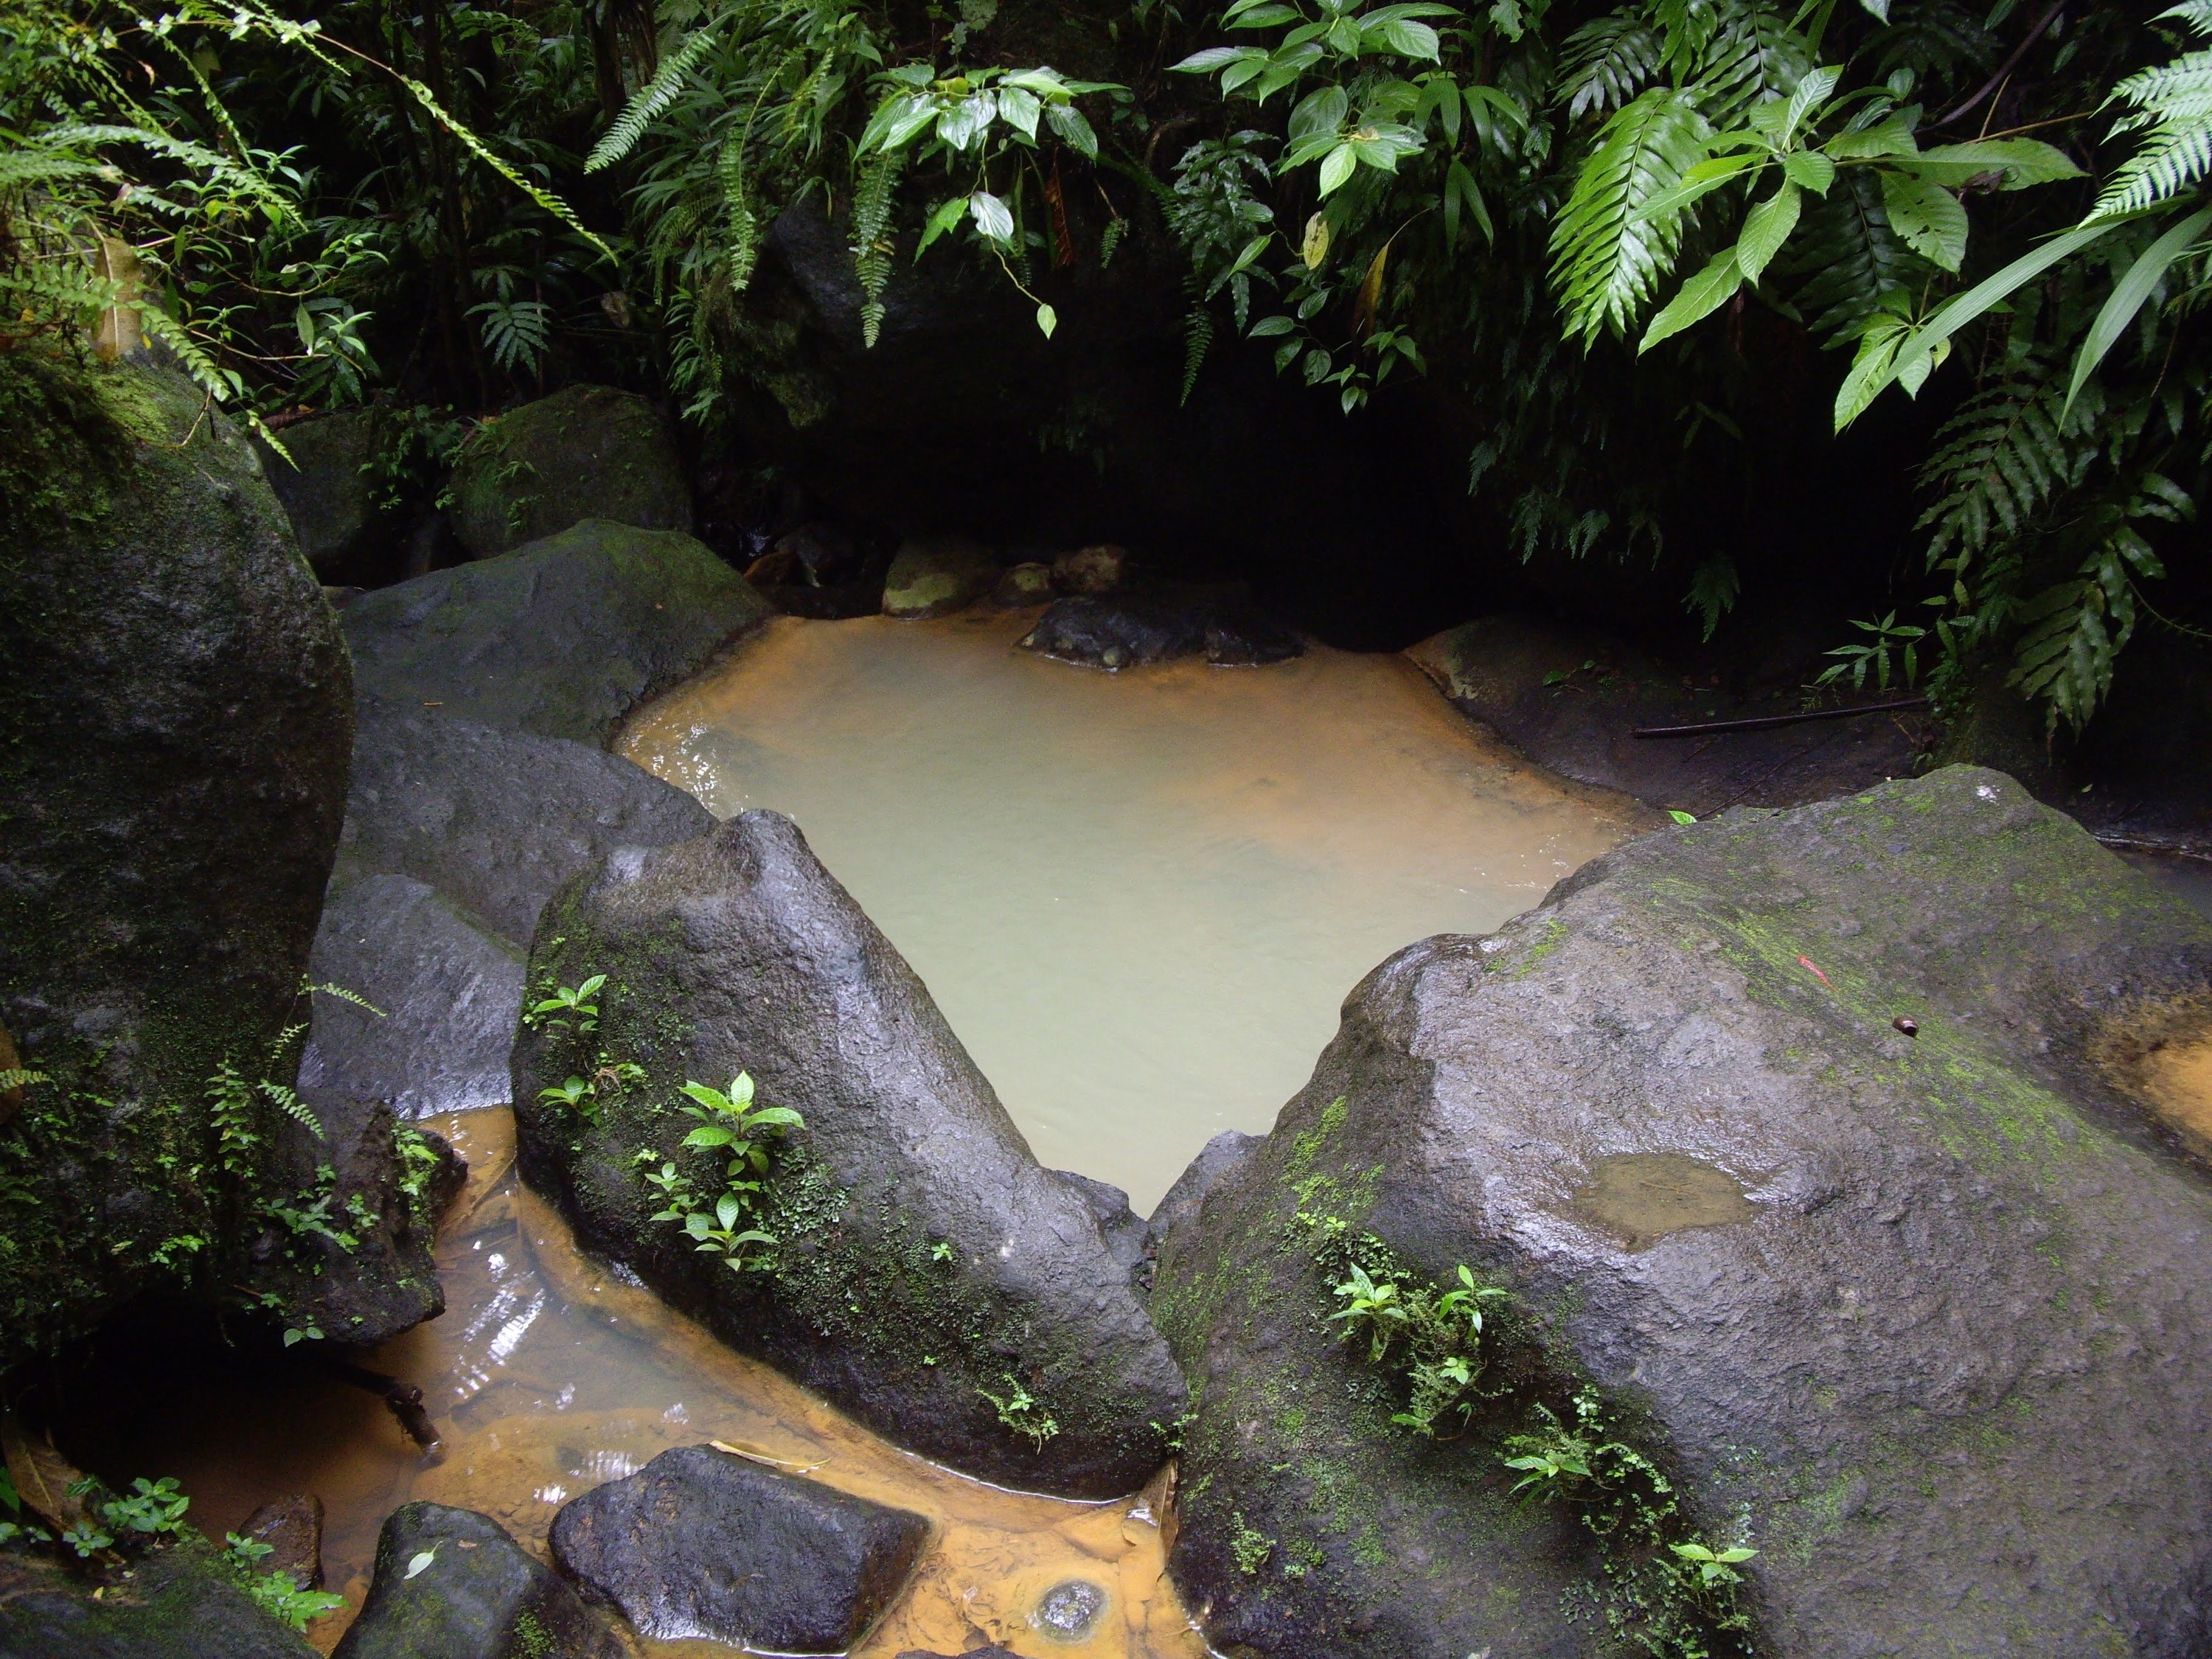 Small hot spring pool in the rocks